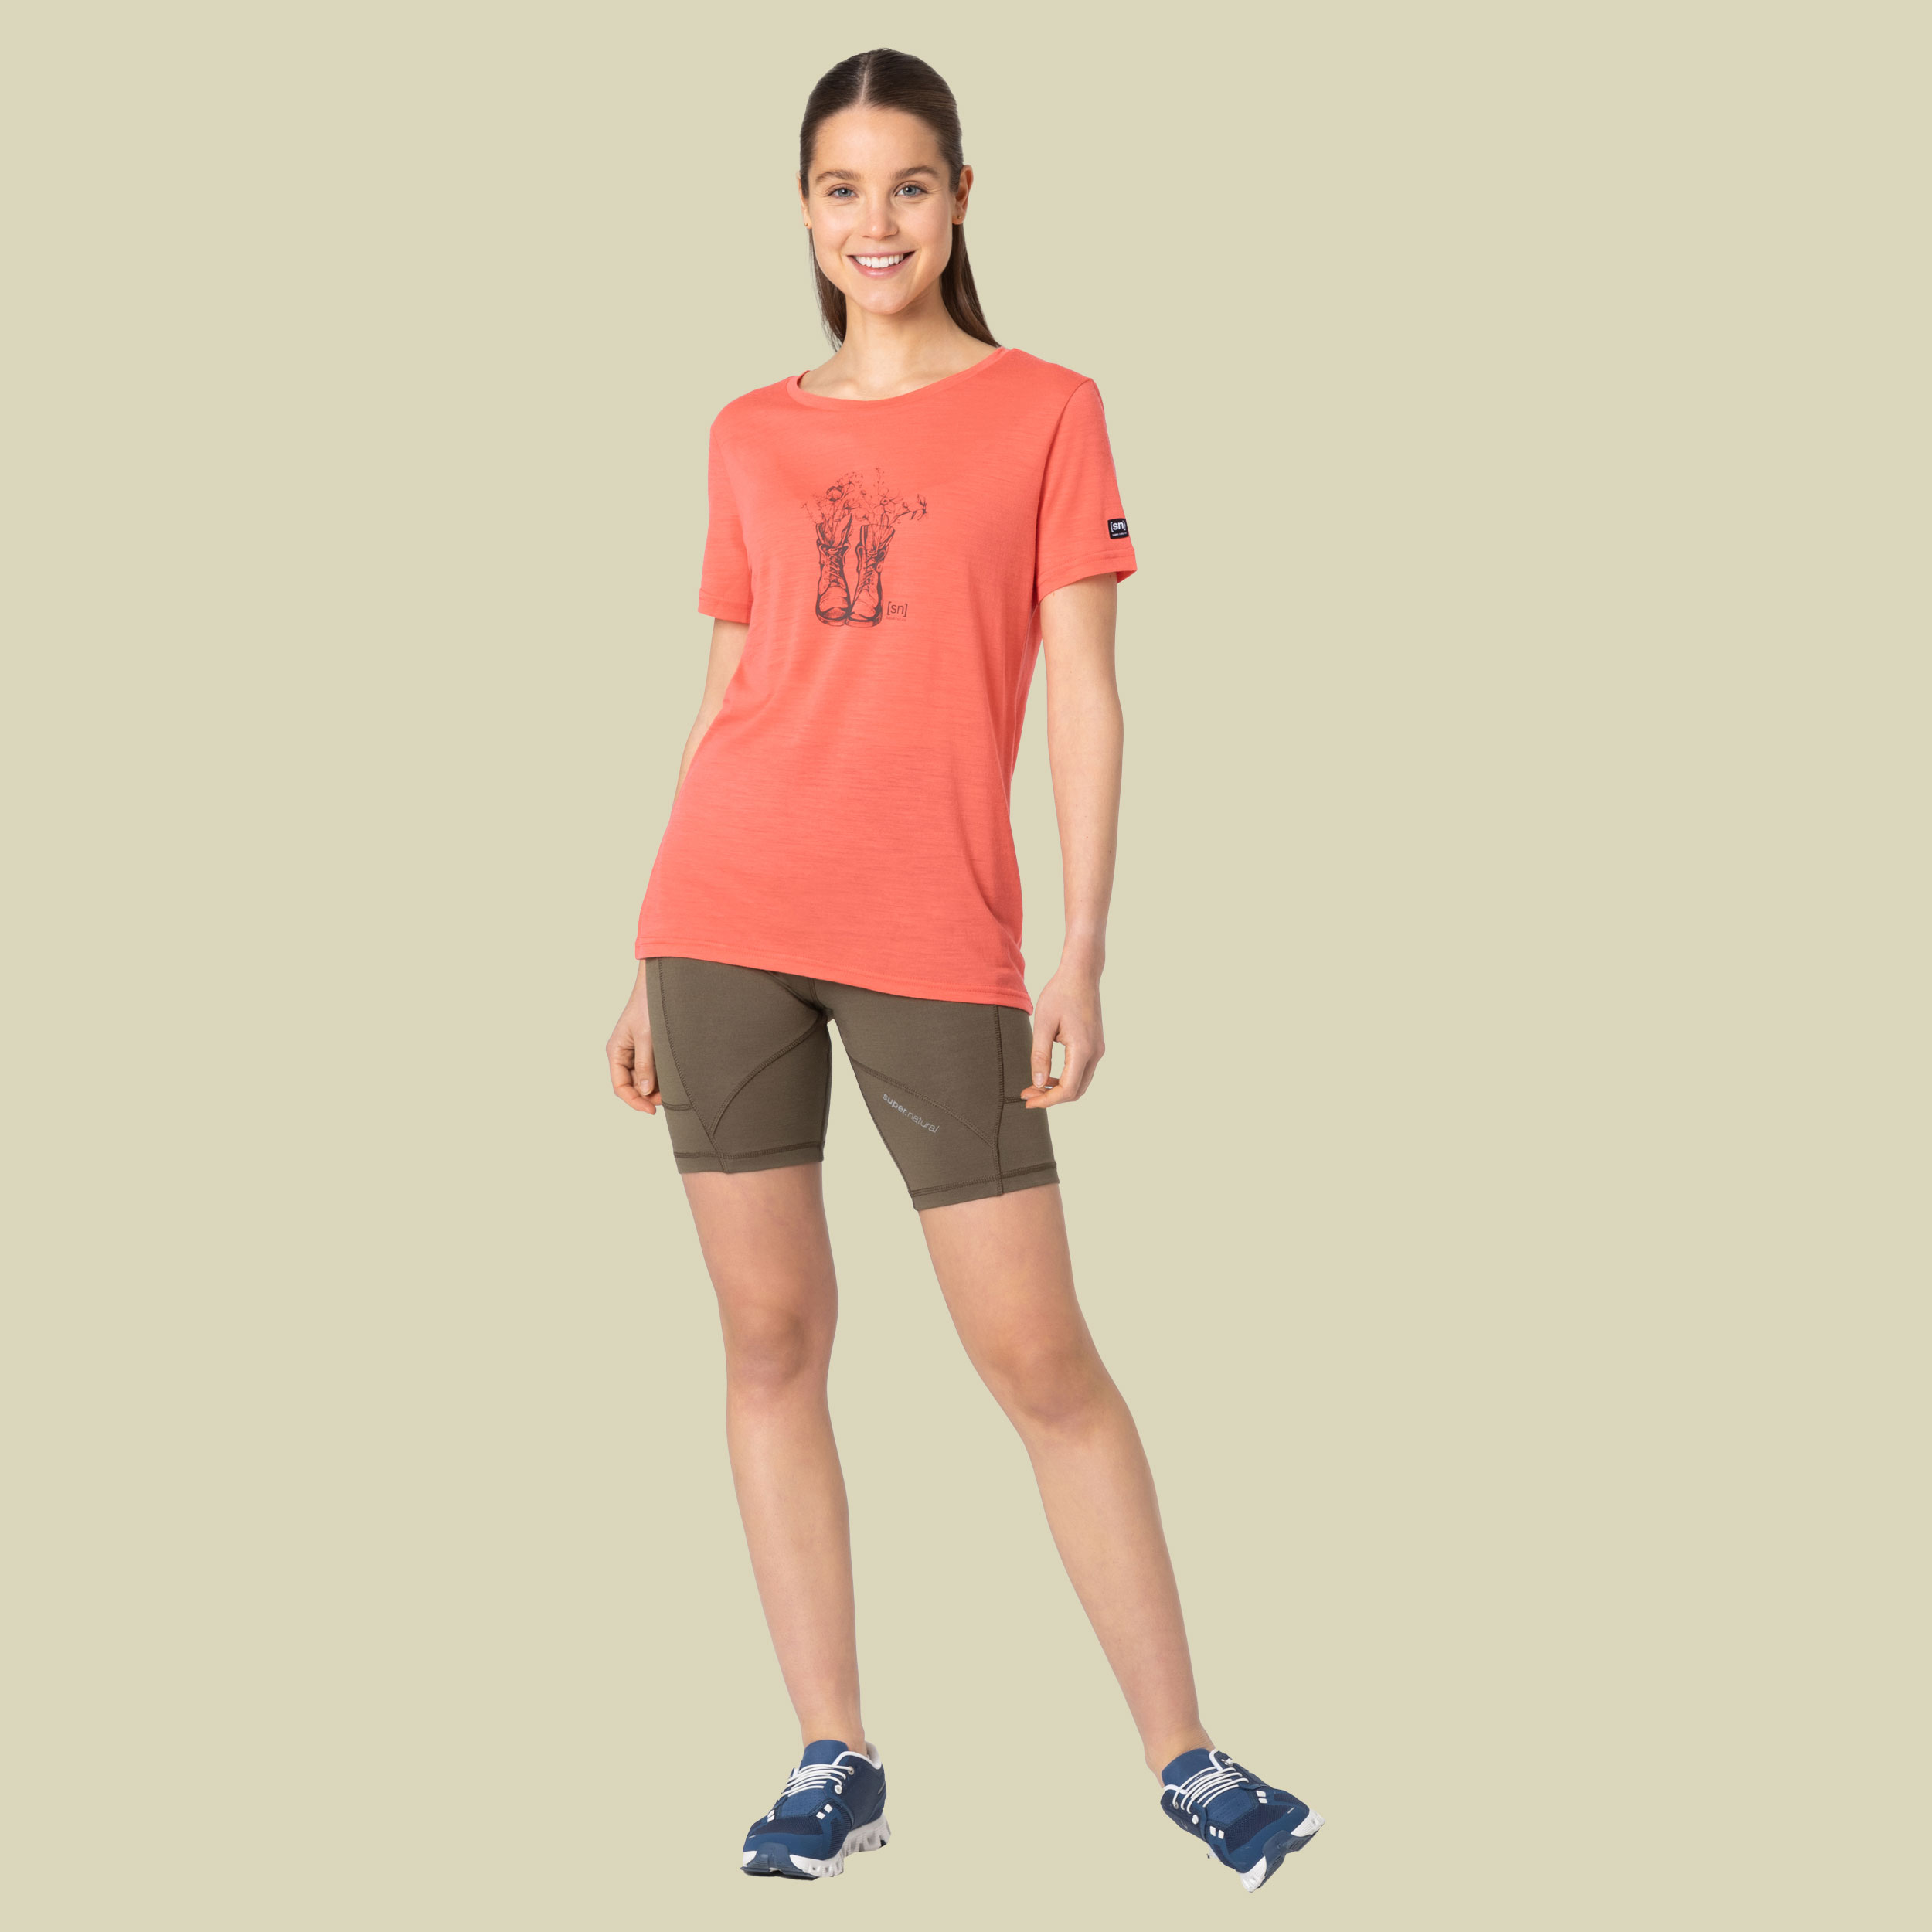 Blossom Boots Tee Women Größe L  Farbe living coral/stone grey